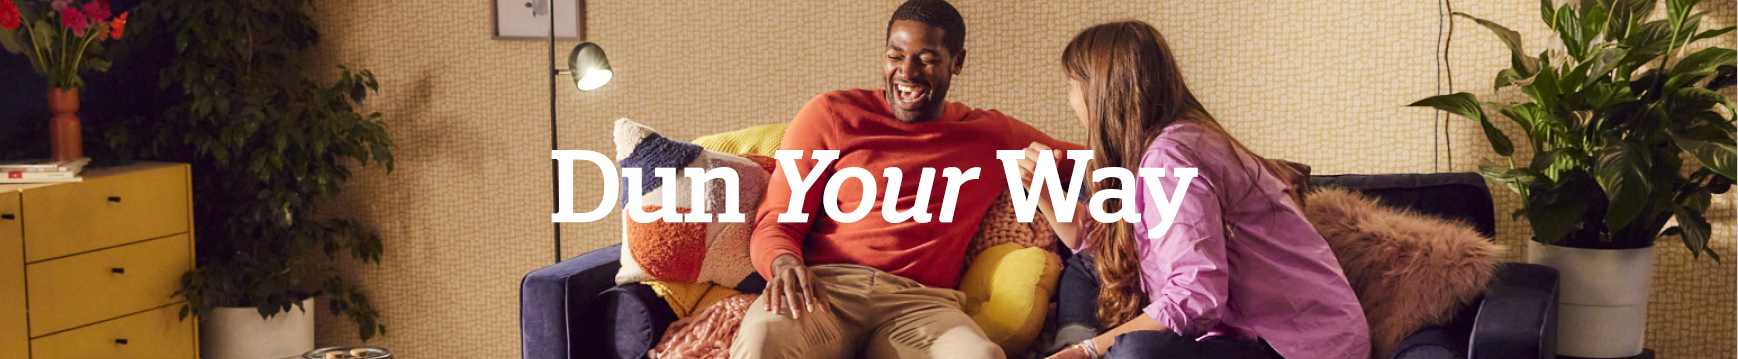 DUN YOUR WAY: Dunelm empowers customers to embrace individuality with new advertising campaign